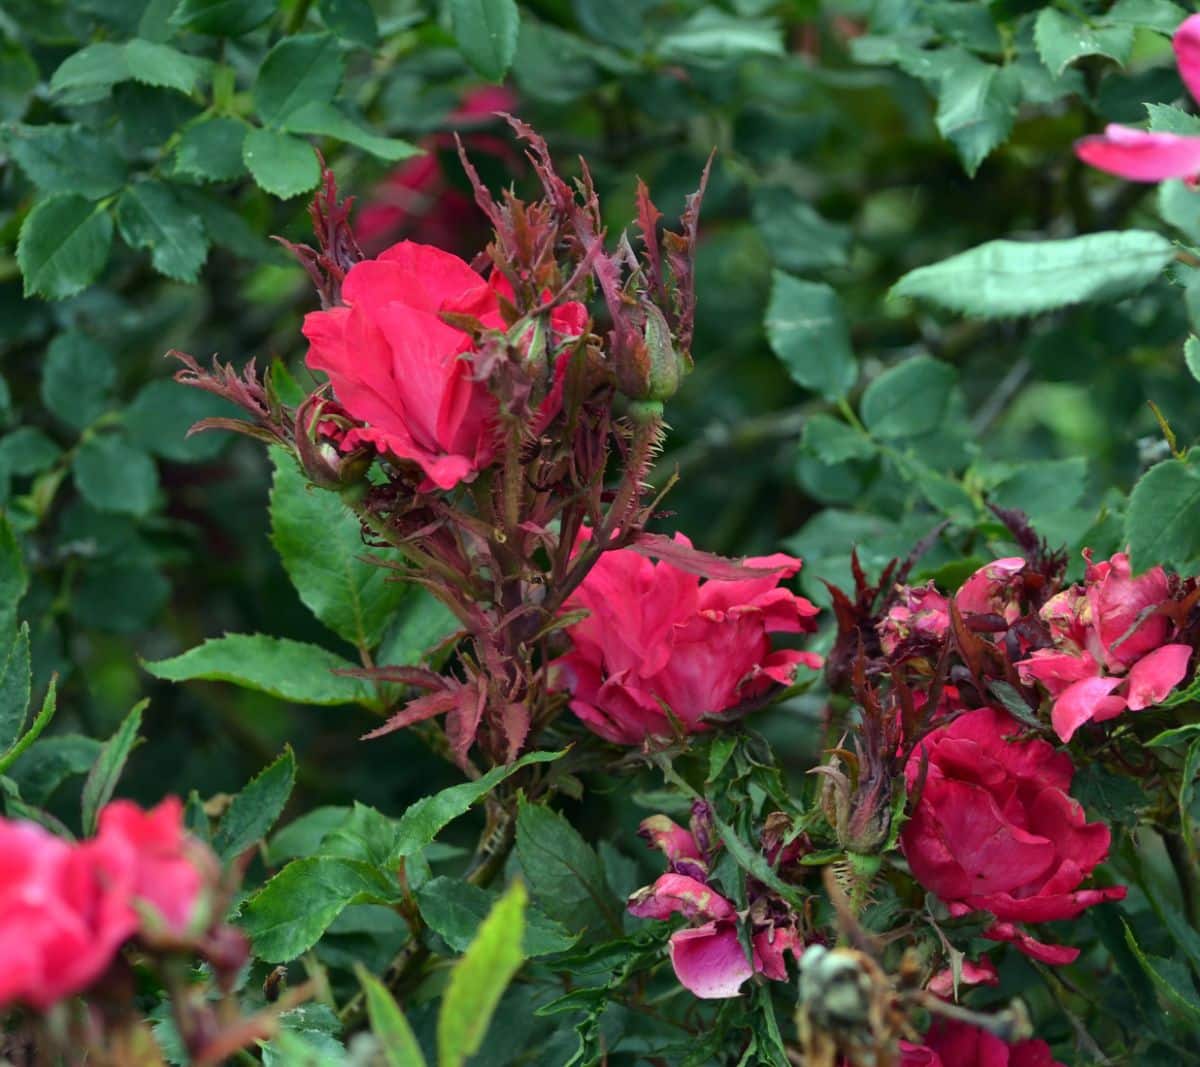 Roses with rosette disease